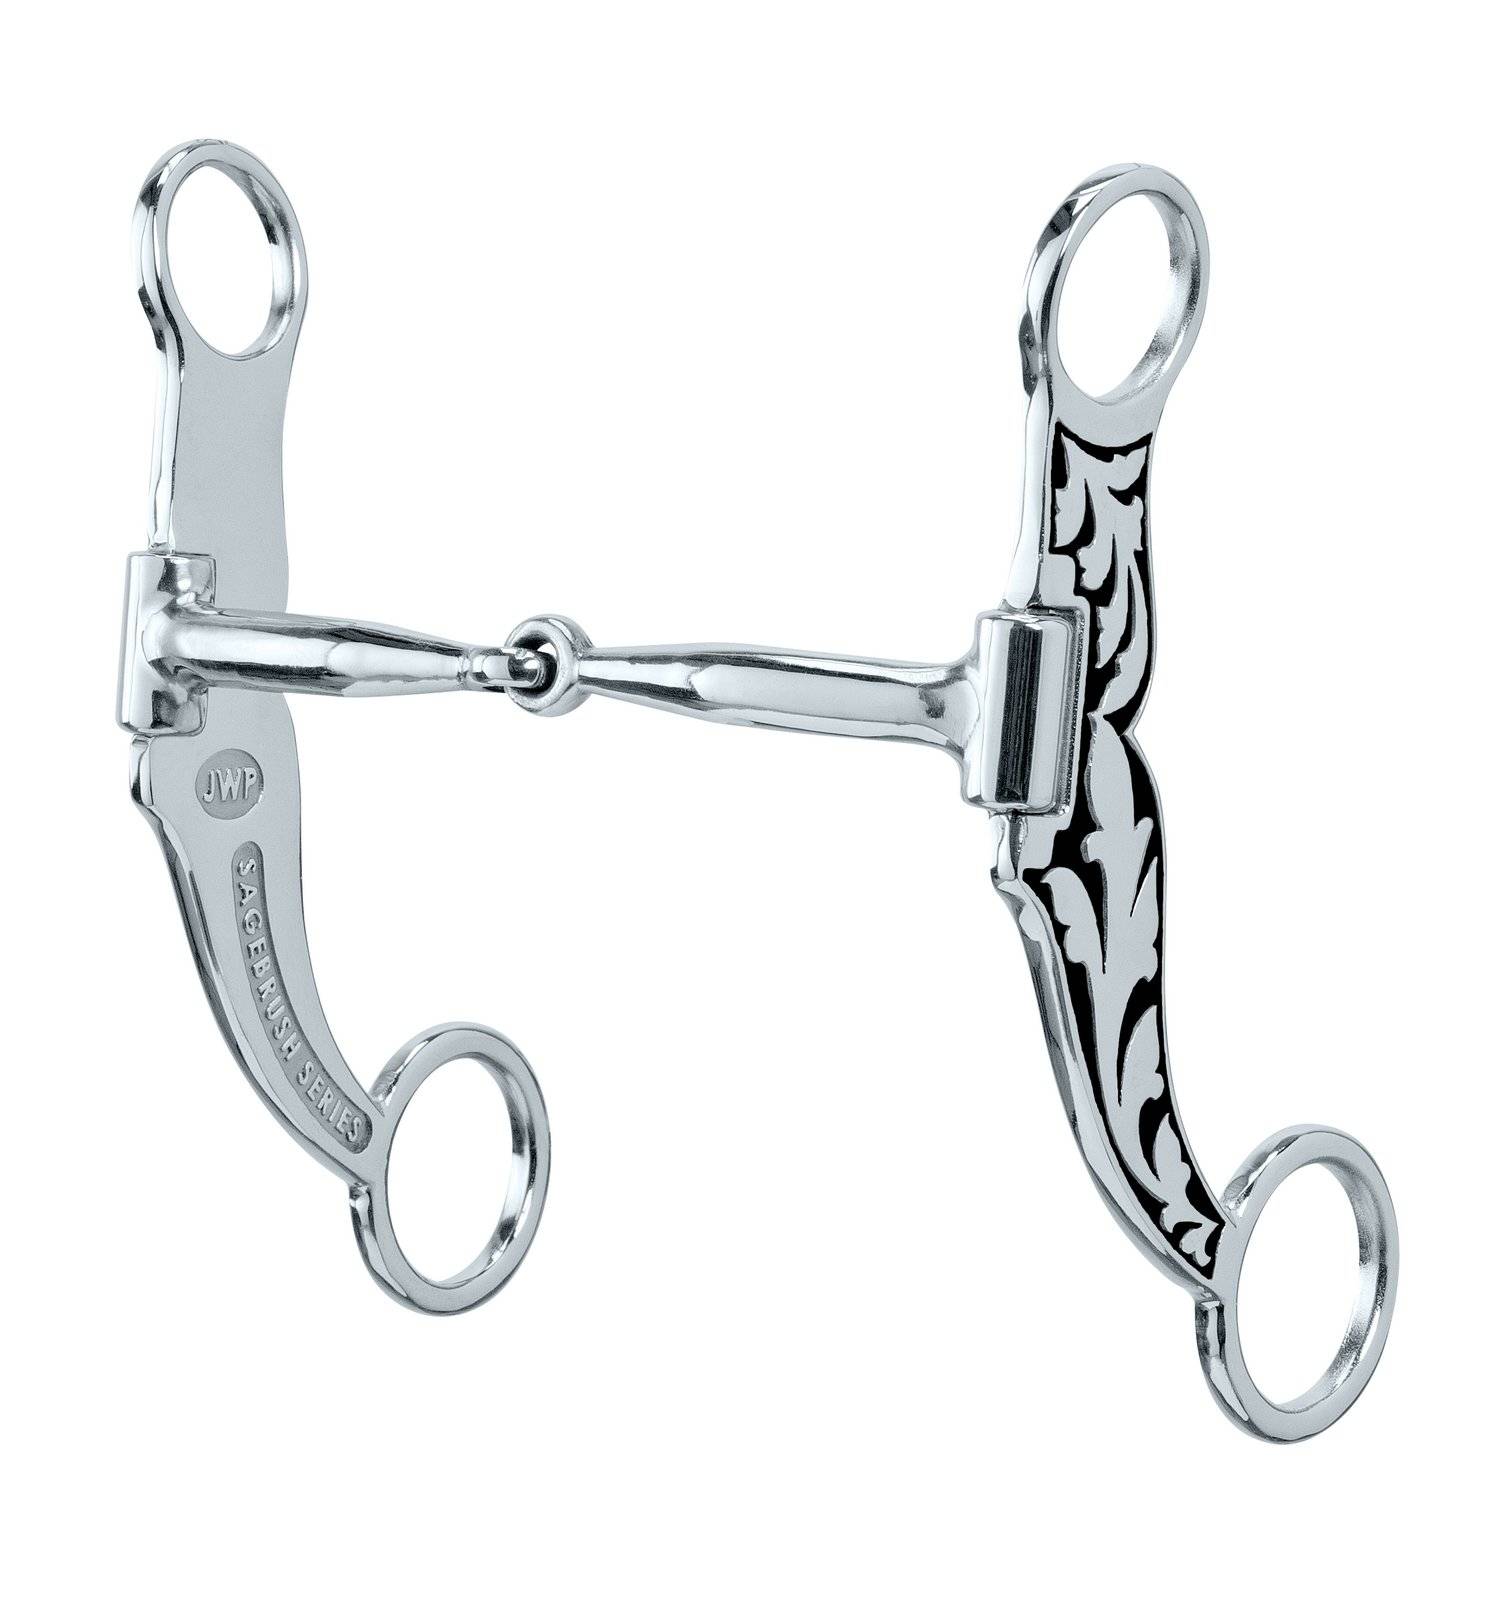 Weaver Professional Argentine Bit Features 5-Inch Sweet Iron Snaffle